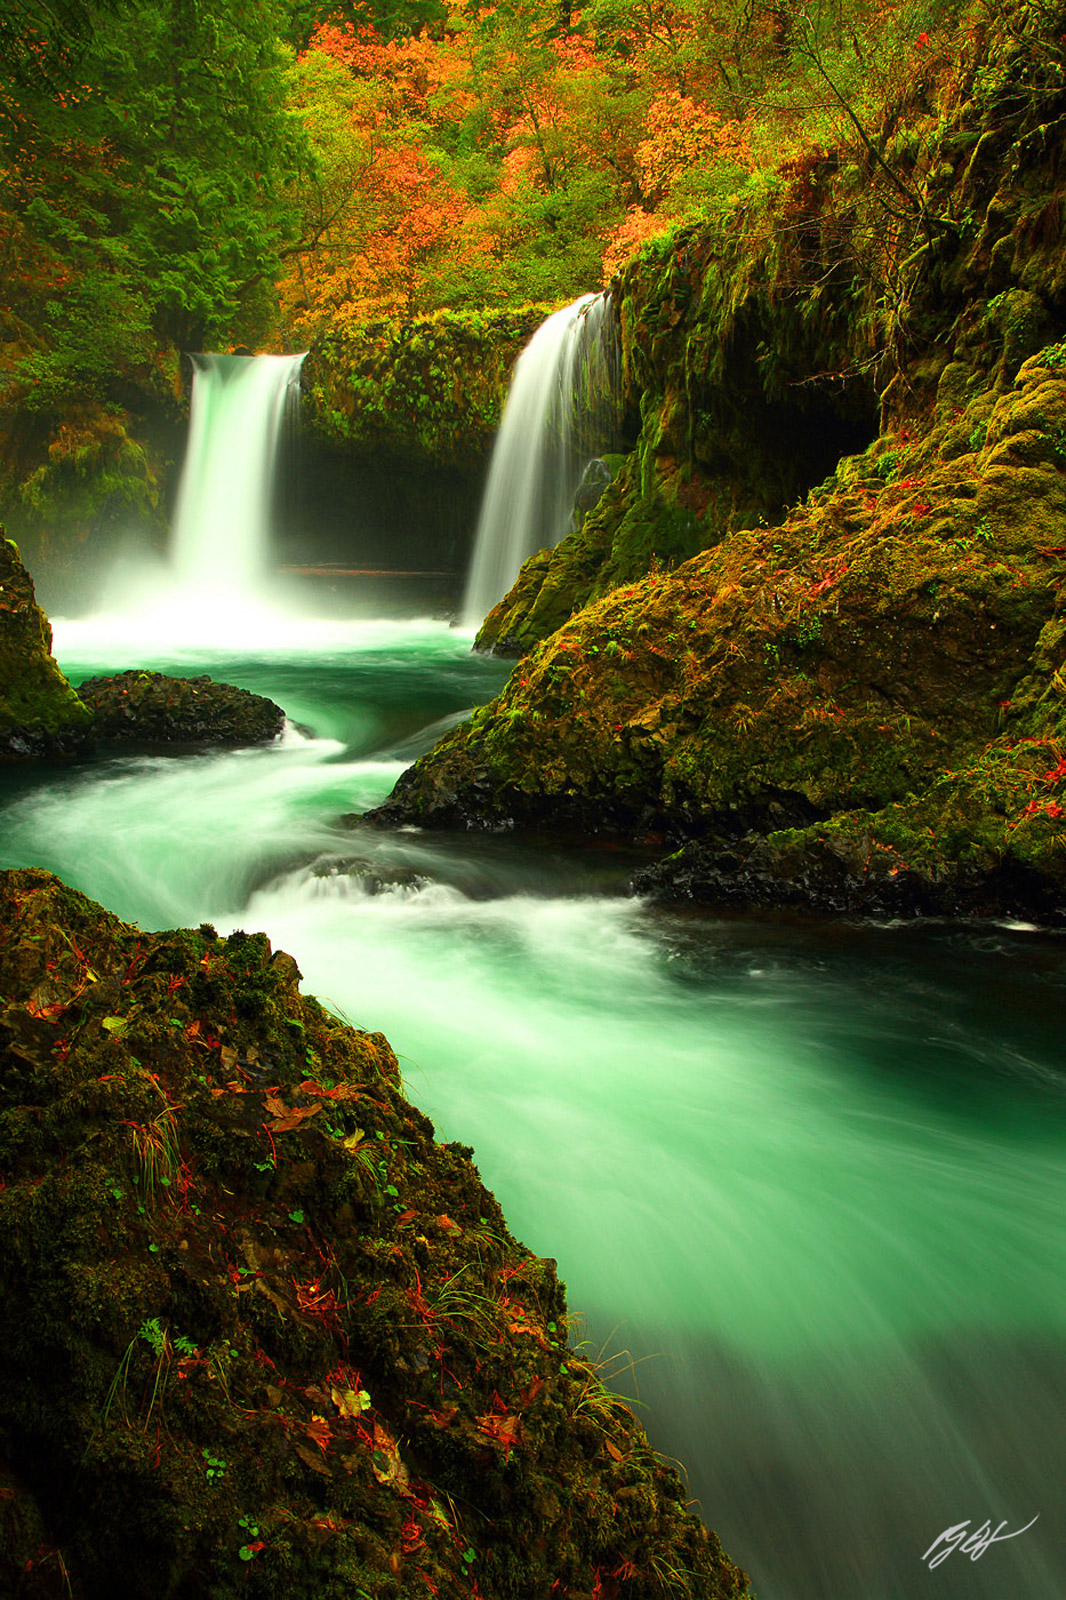 Sprit Falls in Fall in the Columbia River Gorge in Washington